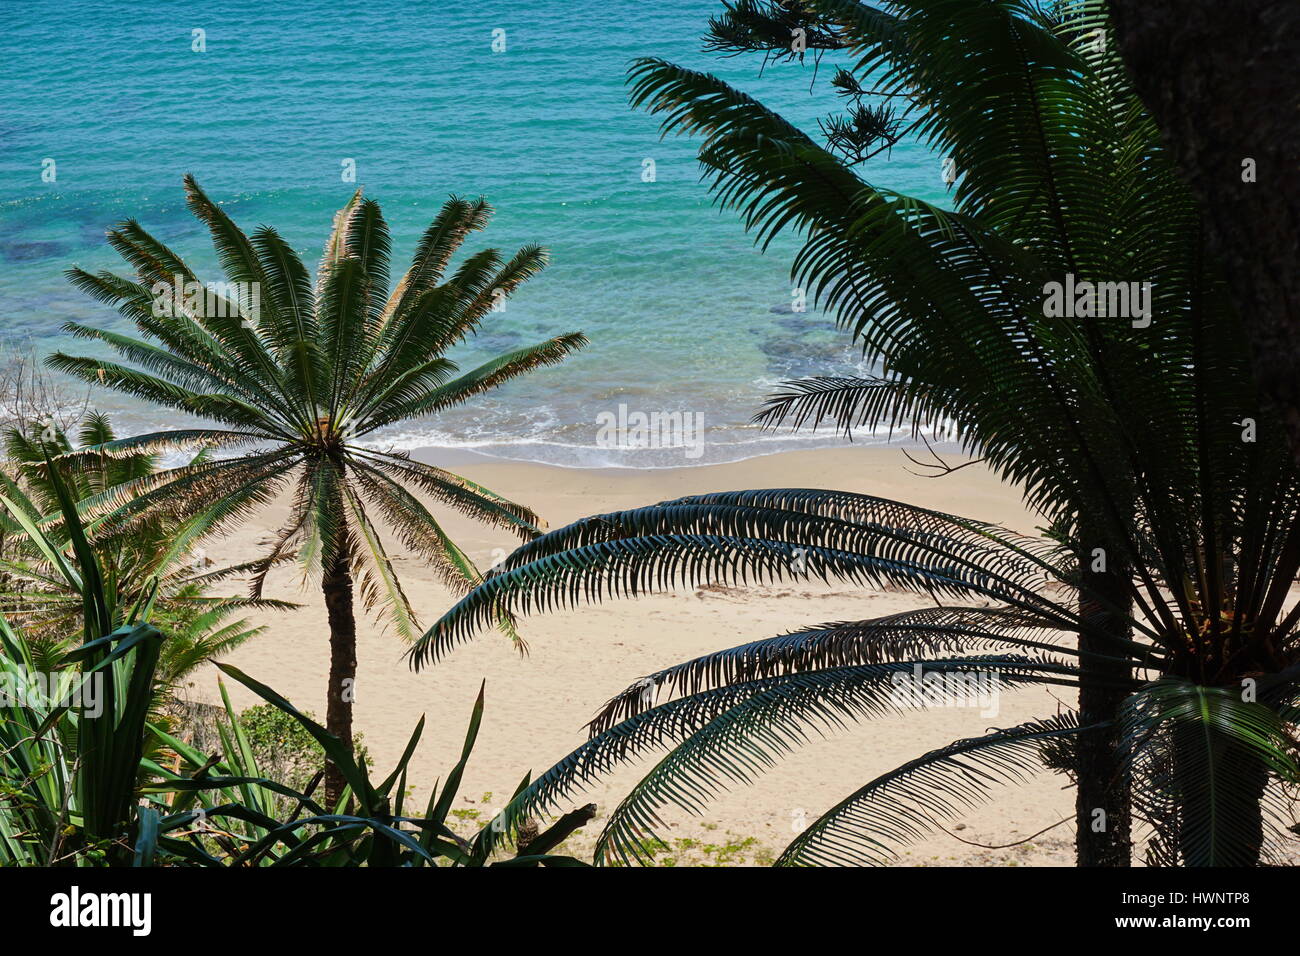 Foliage of Cycas trees with sandy beach shore in background, Bourail, Grande Terre island, New Caledonia, south Pacific Stock Photo